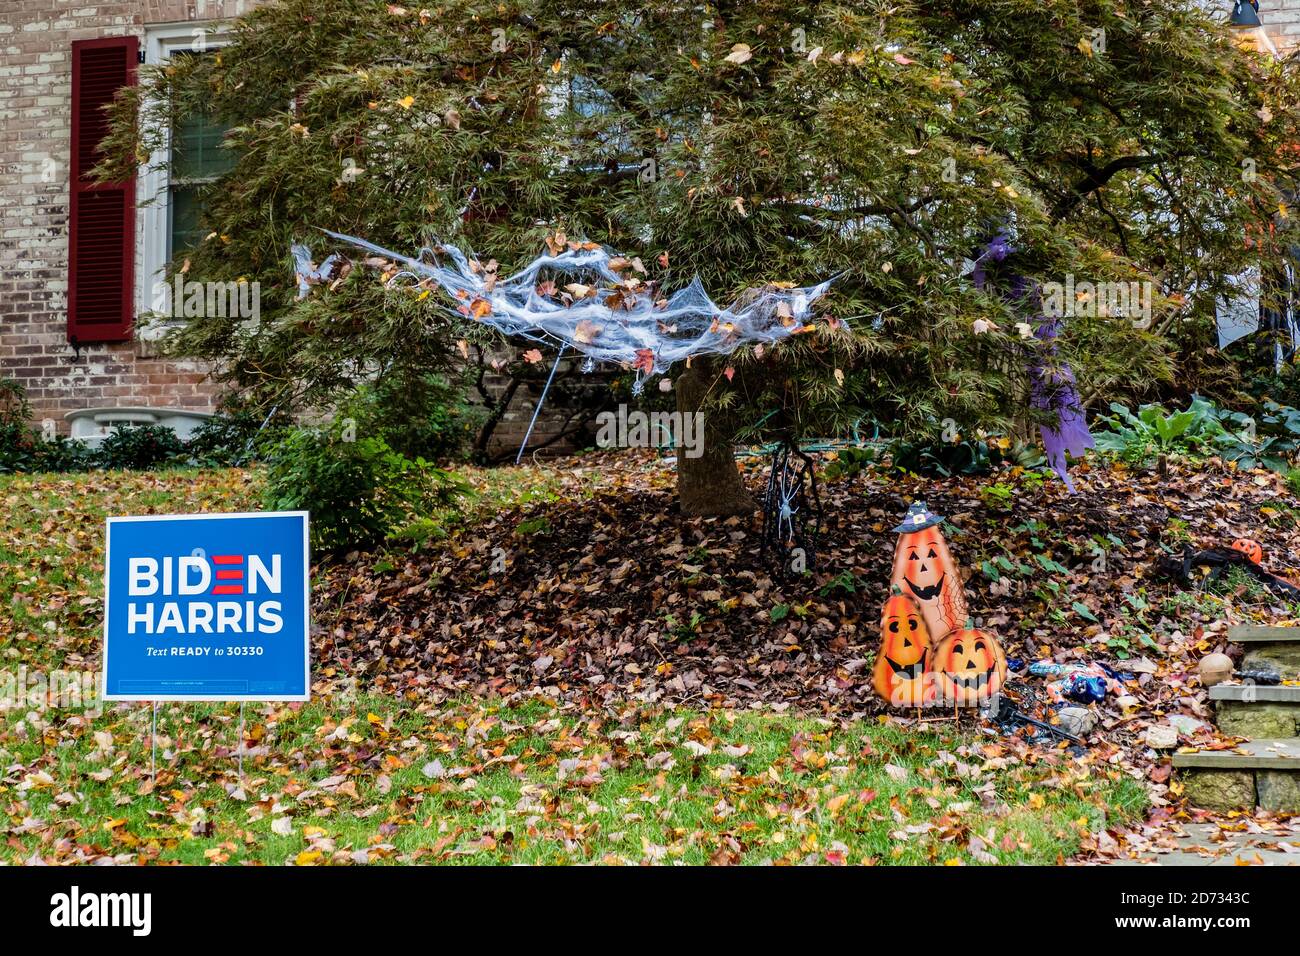 US 2020 Election poster and Halloween decoration Stock Photo